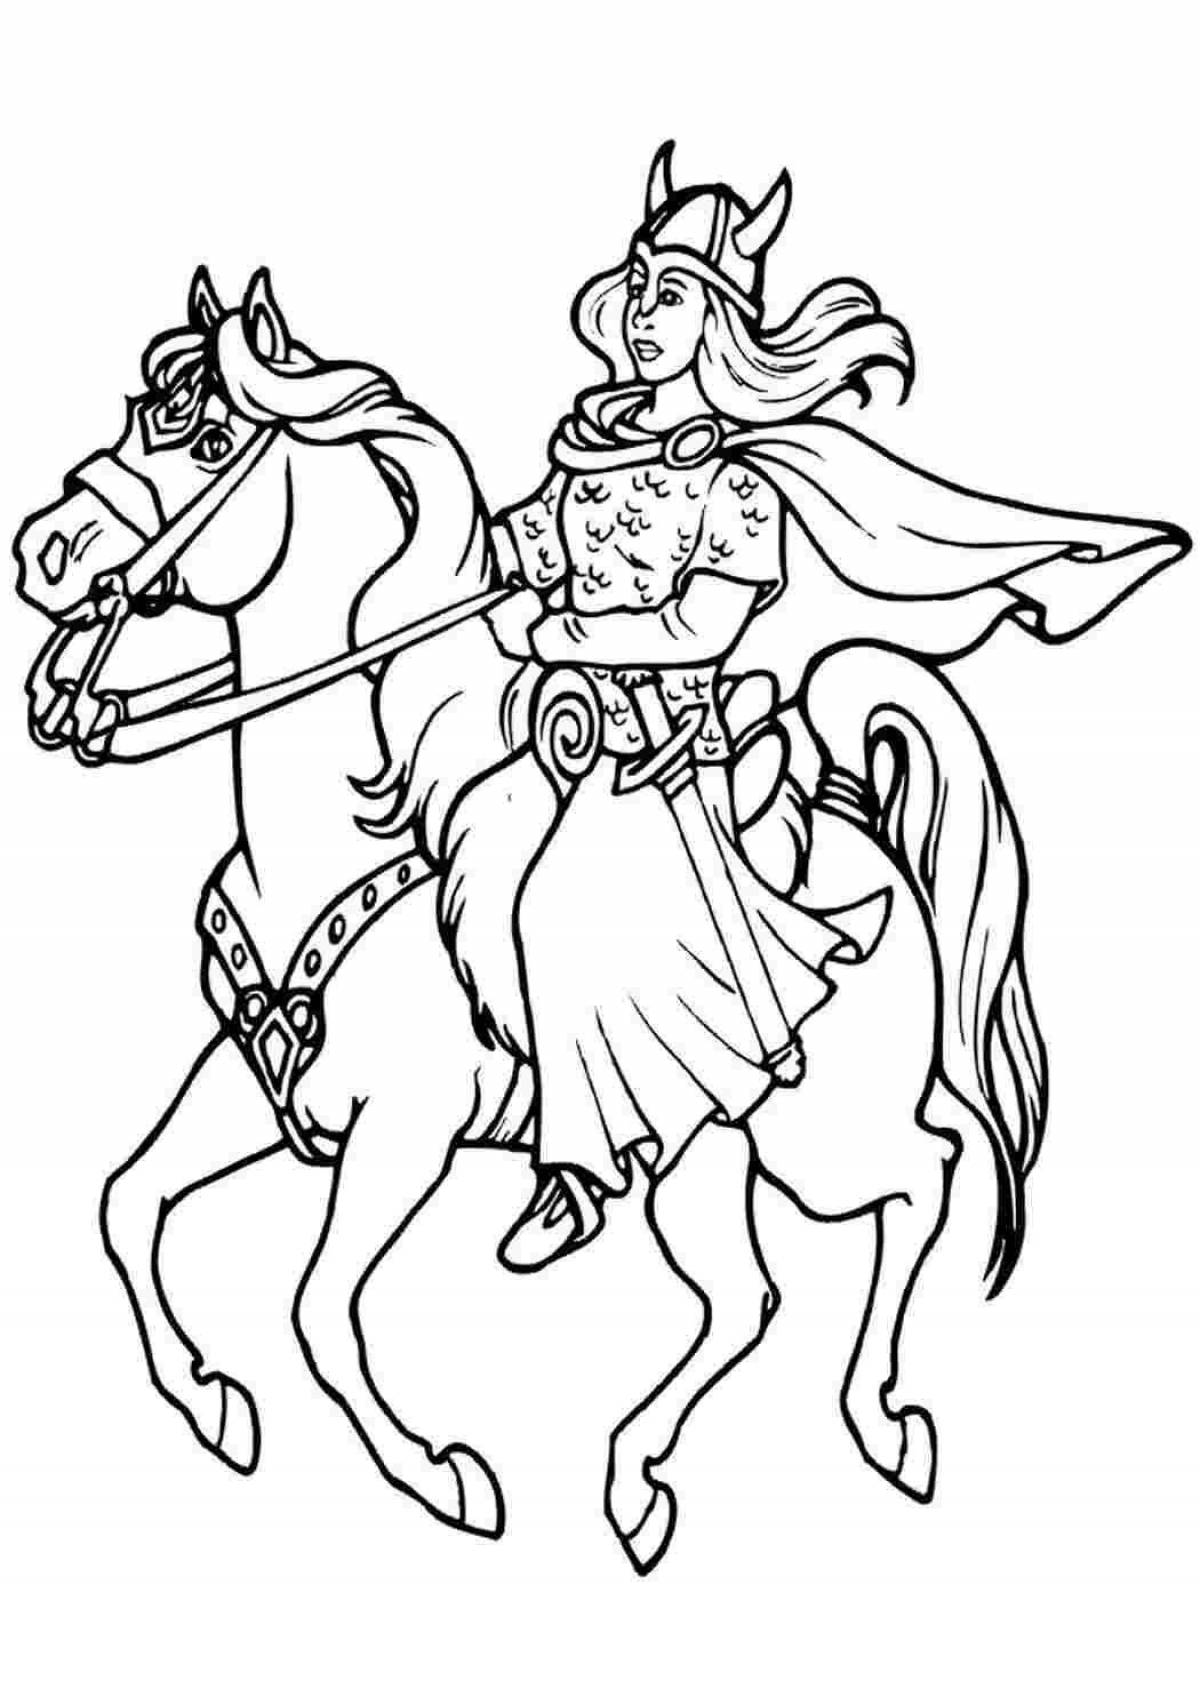 Radiant coloring page hero on horse